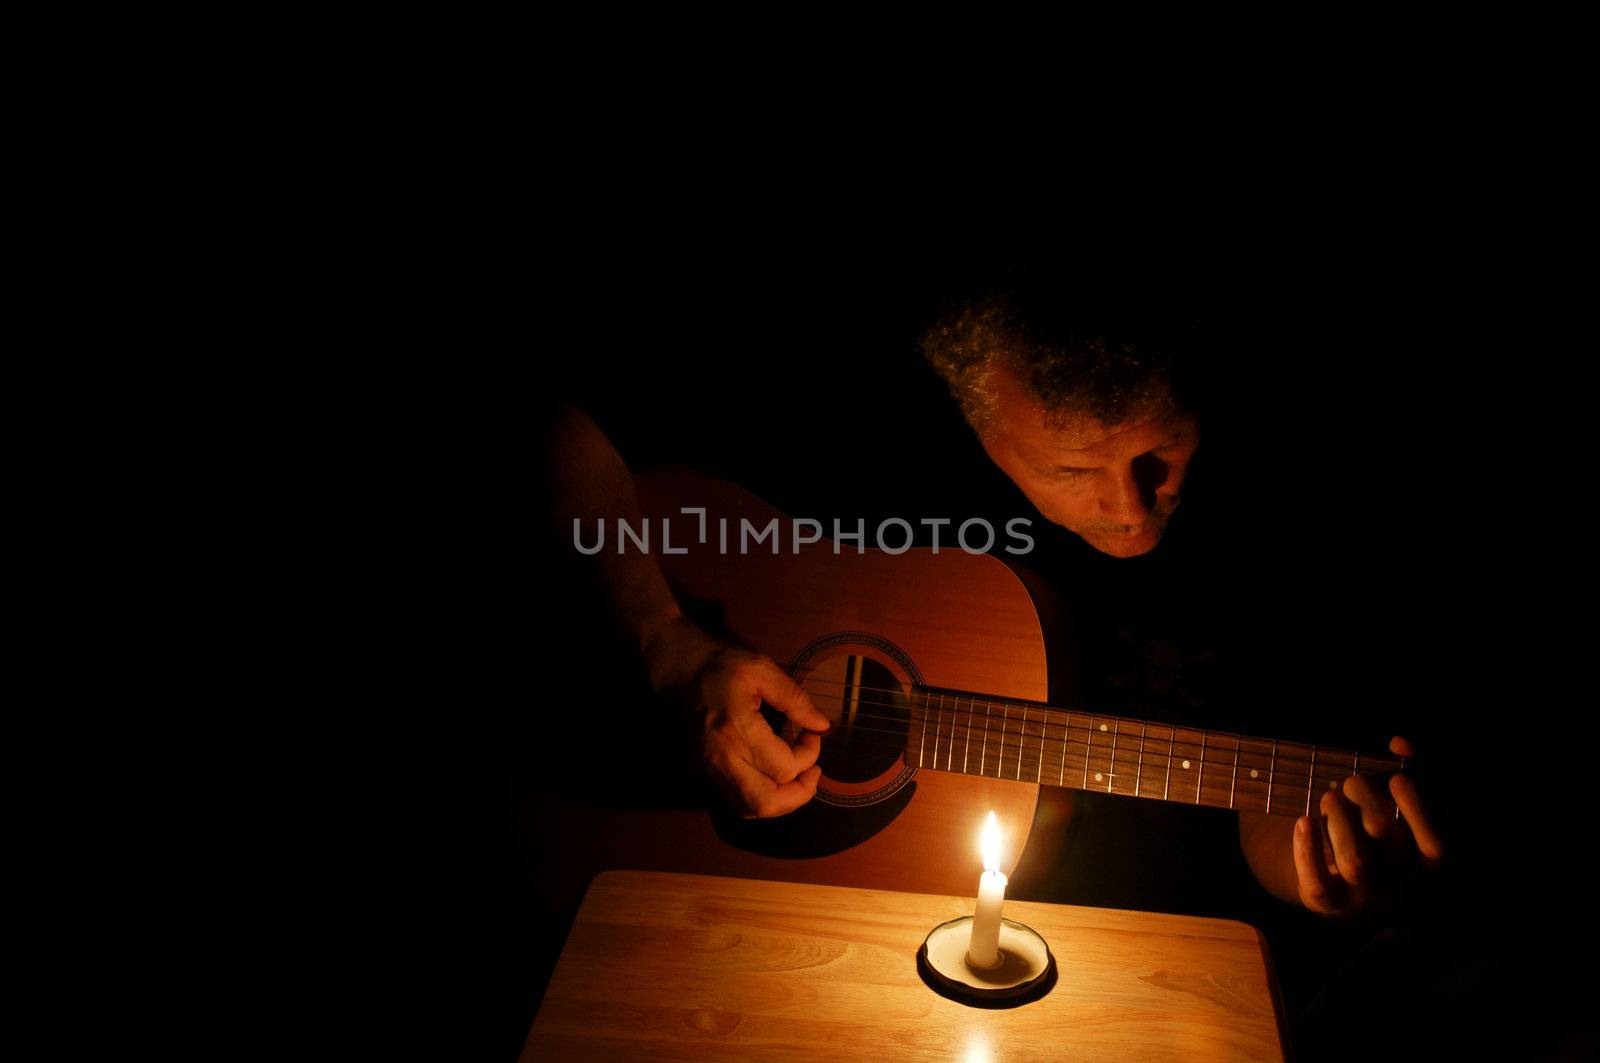 A middle-aged man playing his guitar at night by candlelight.